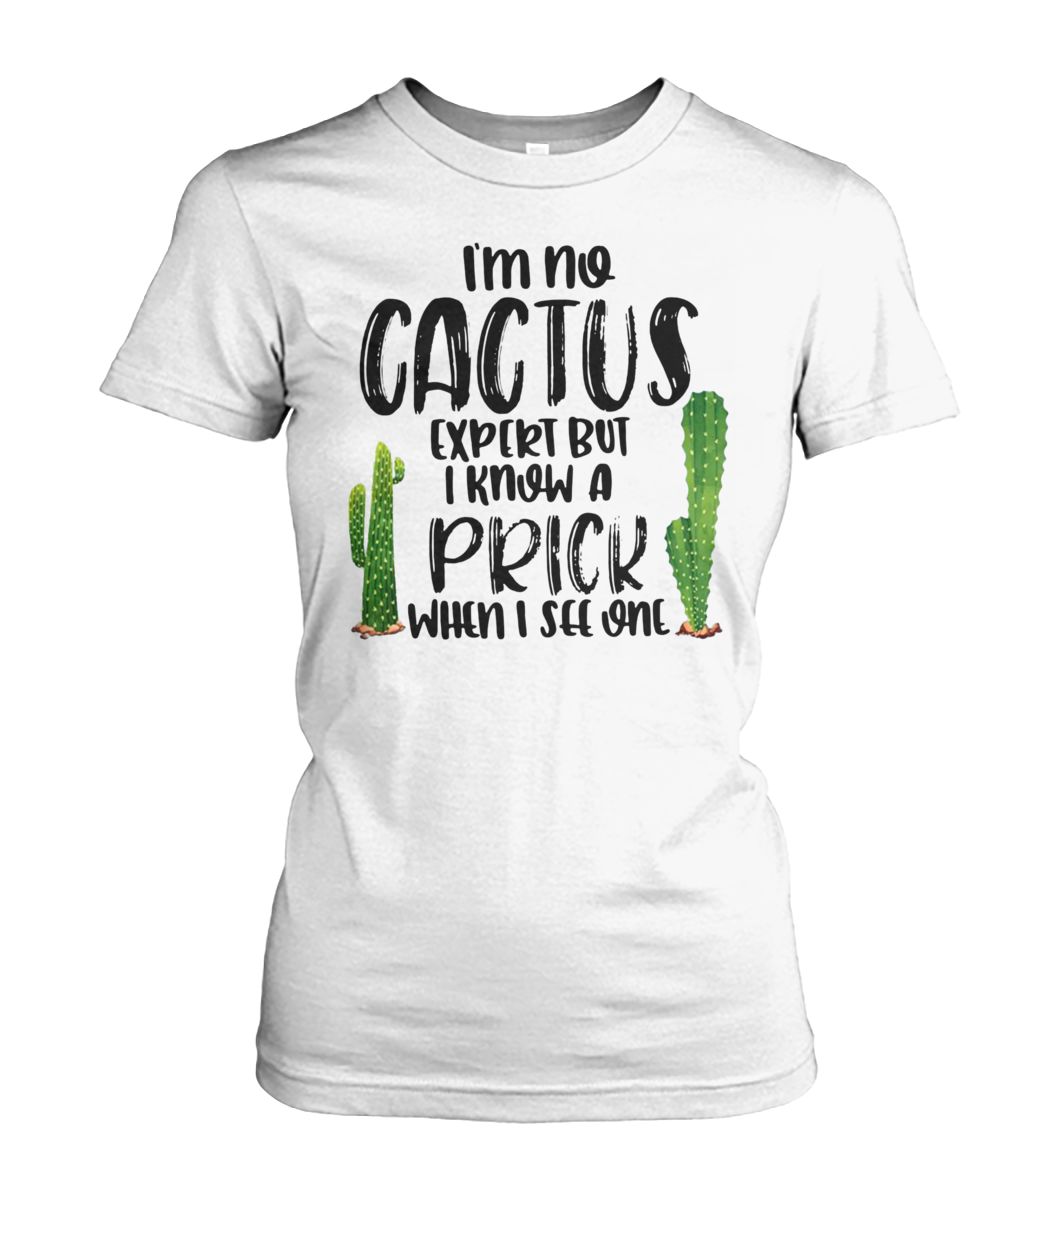 I'm no cactus expert but I know a prick when I see one women's crew tee